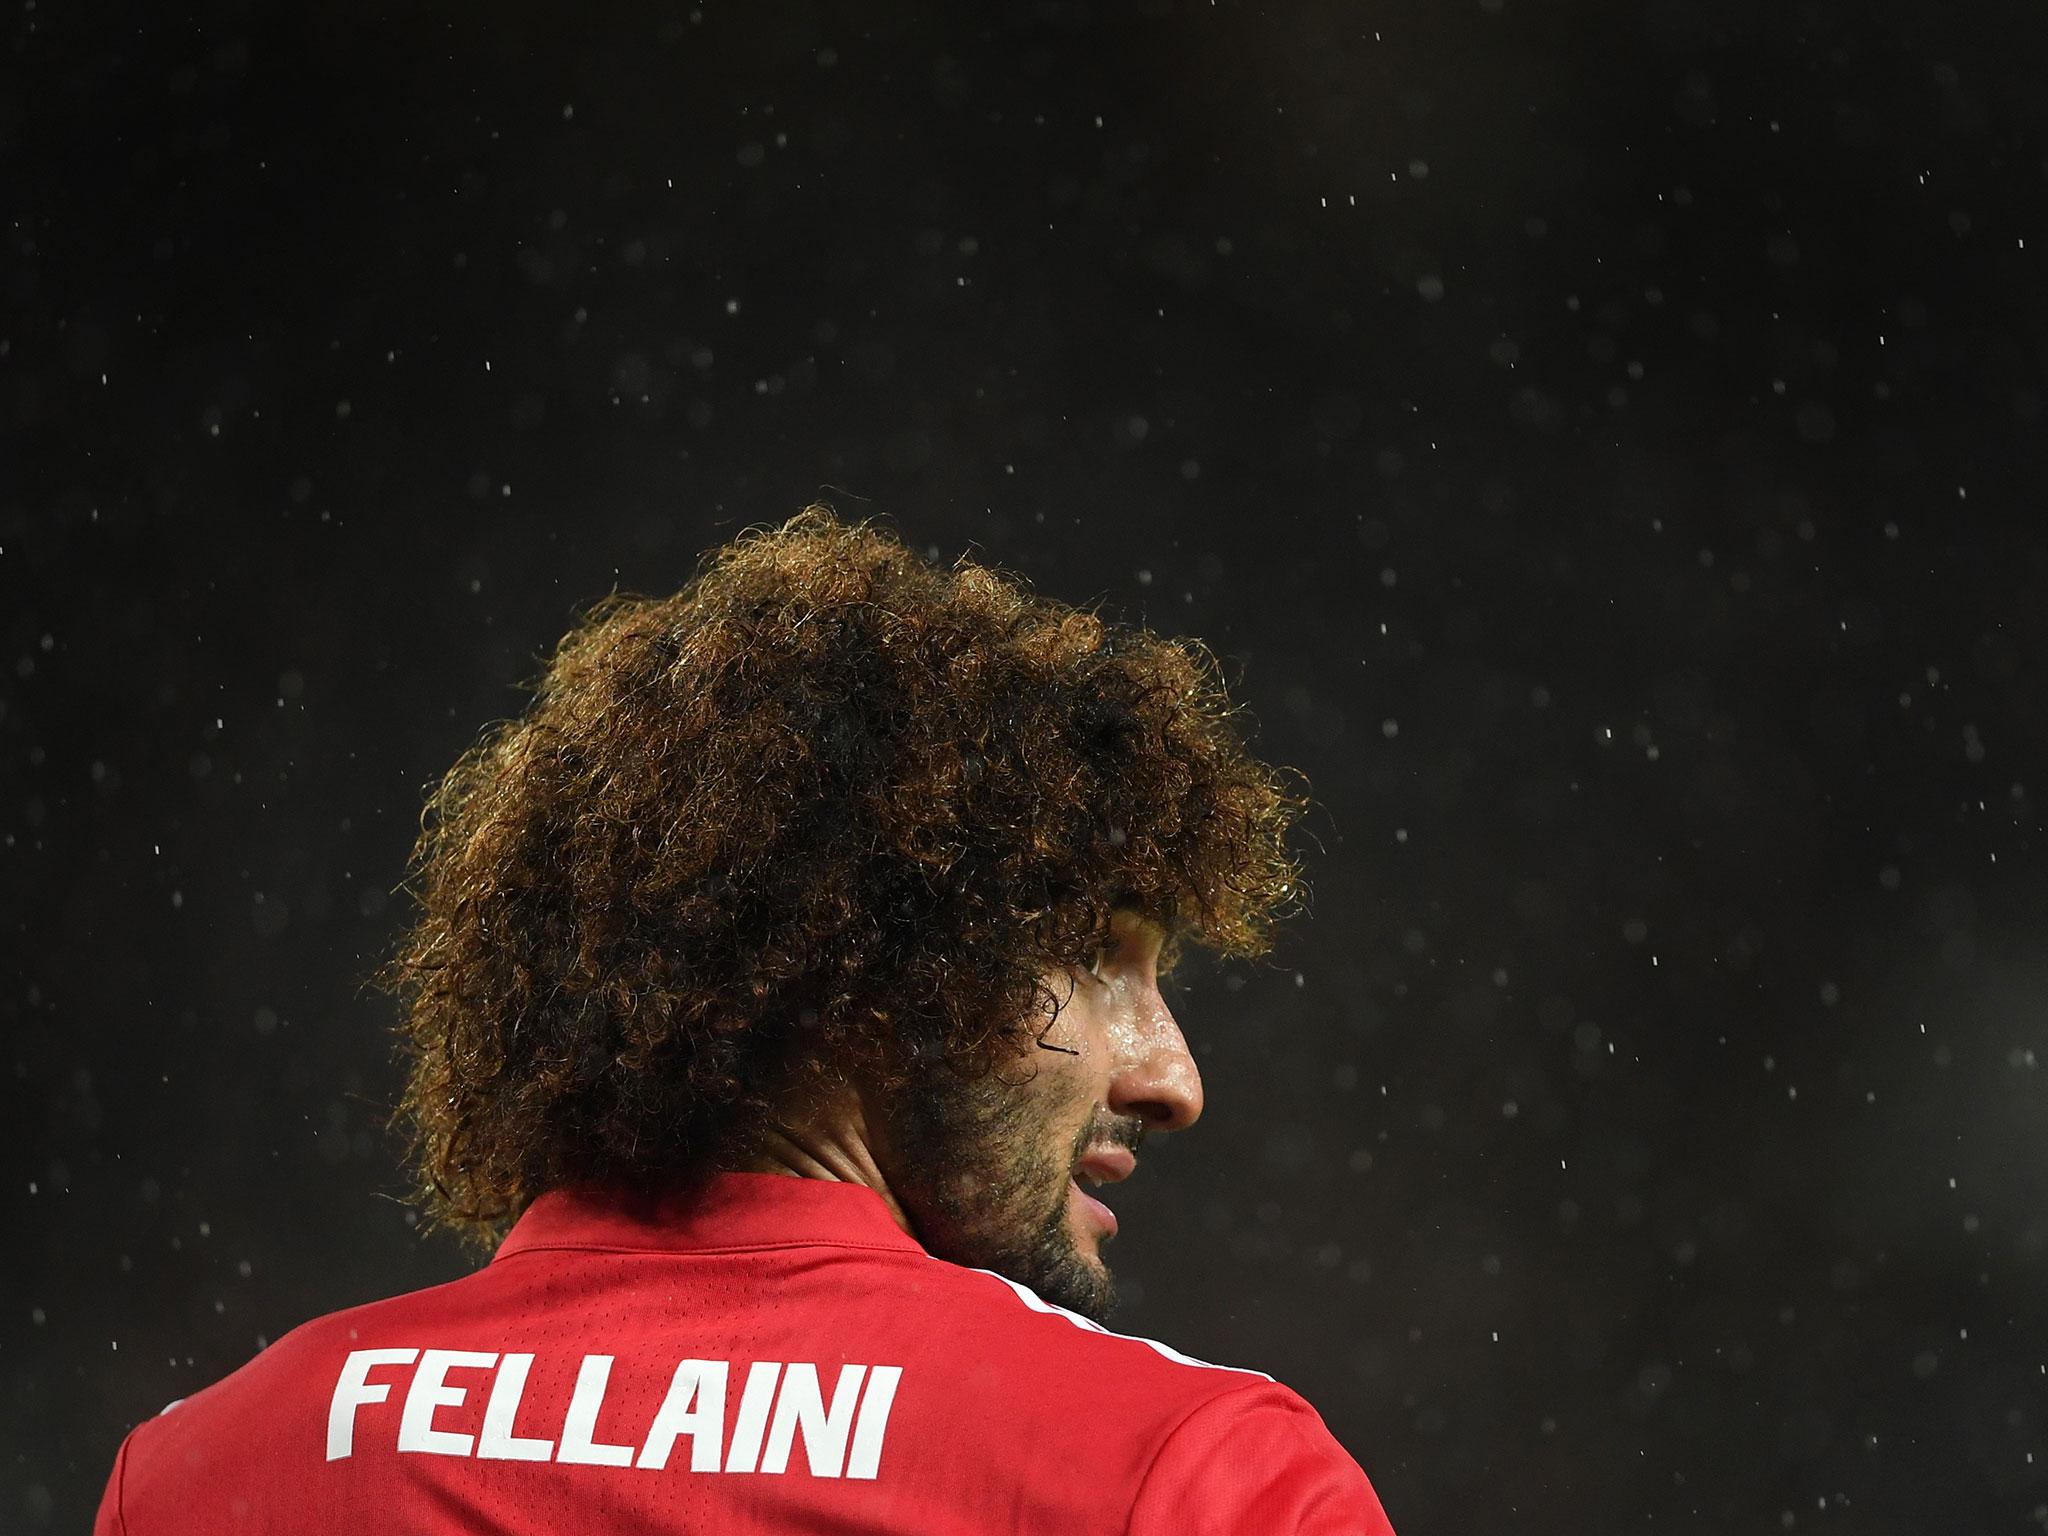 Fellaini has become one of the manager's favoured players because of how perfectly he carries out instructions